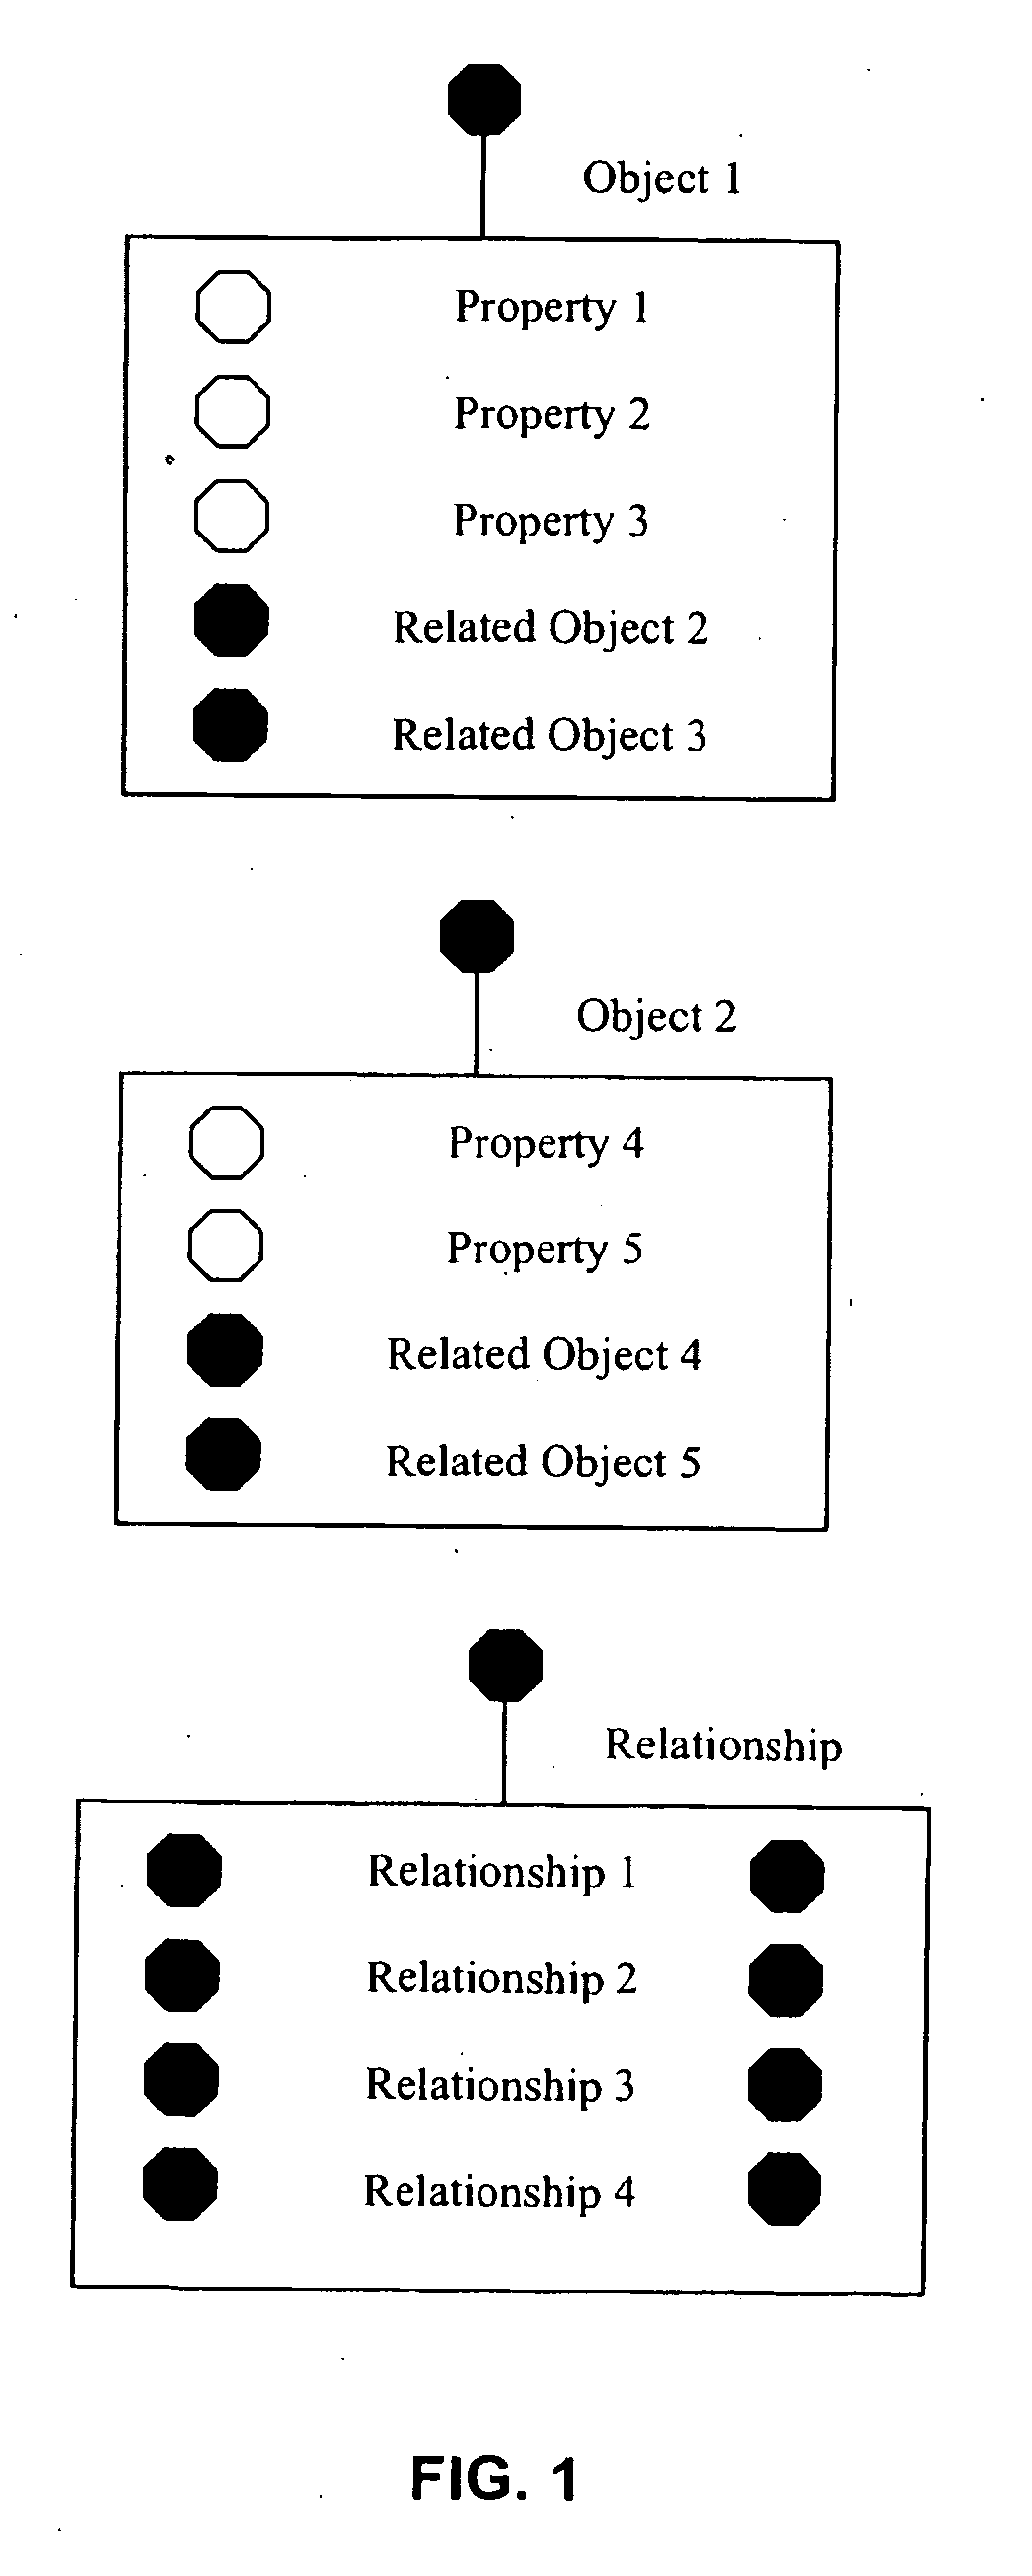 Method of compact display combined with property-table-view for a complex relational data structure